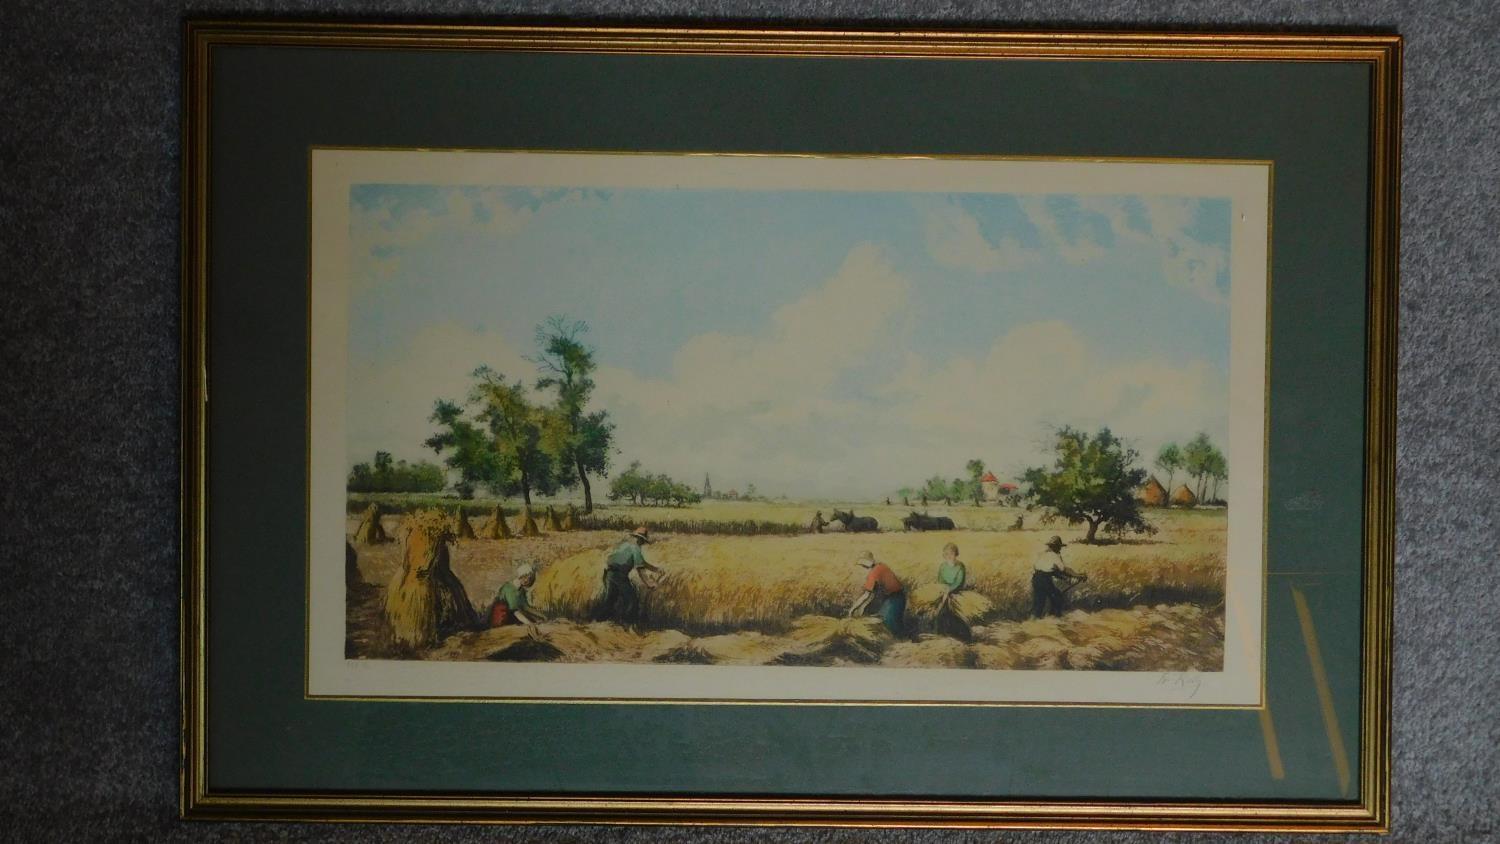 A limited edition lithograph, harvest scene, signed lower right in pencil, 36 x 64cm